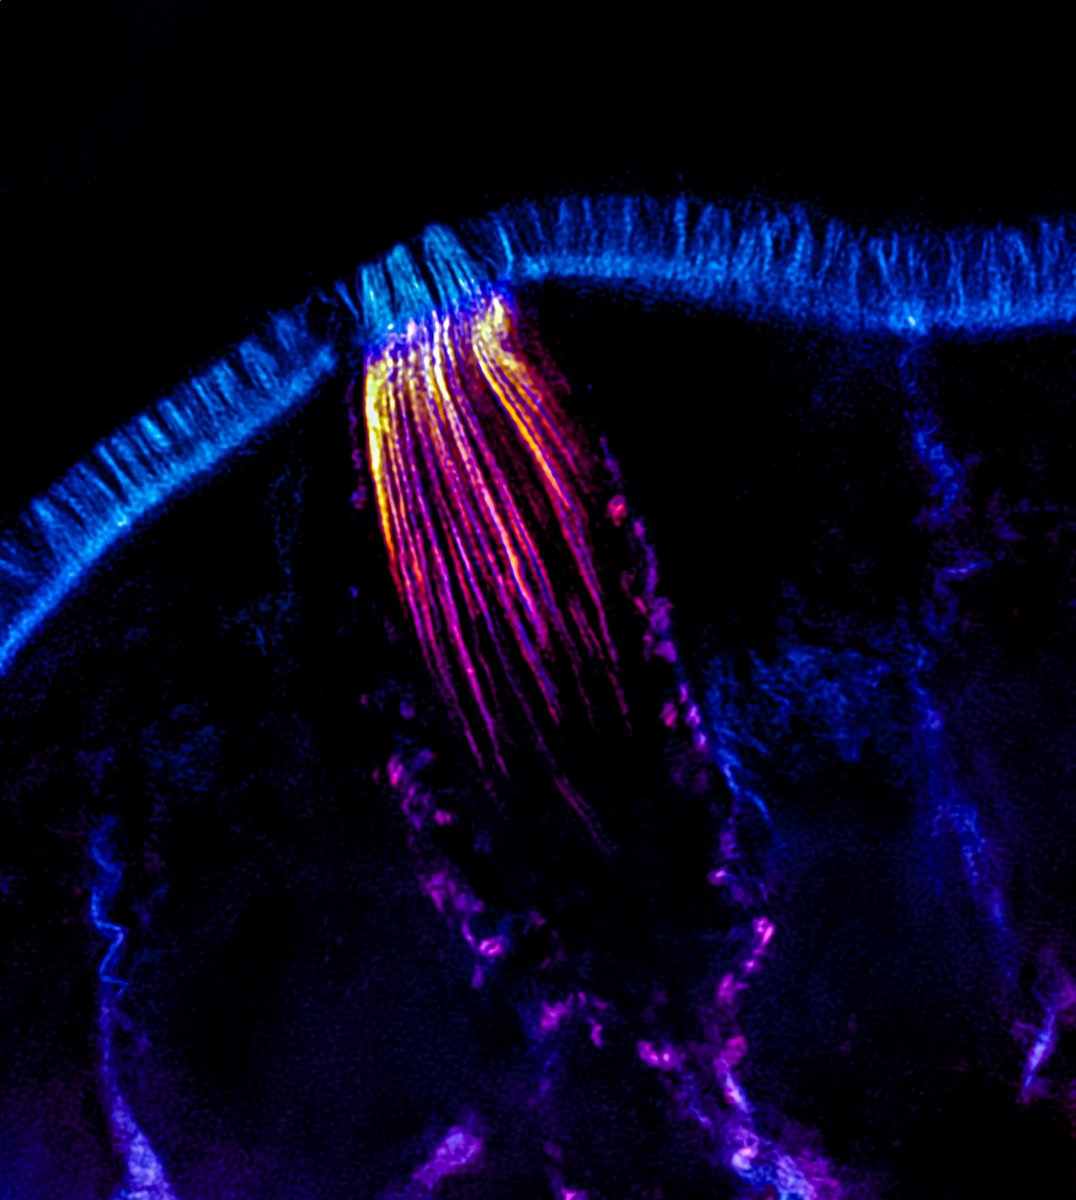 Our featured image this #FluorescenceFriday was acquired by Jen Silverman @TheJenSilverman. It shows the lateral view of an intestinal tuft cell imaged by SIM. For more information about the image and about Jen’s research @TyskaLabActual @VanderbiltCDB: focalplane.biologists.com/2024/05/24/fea…